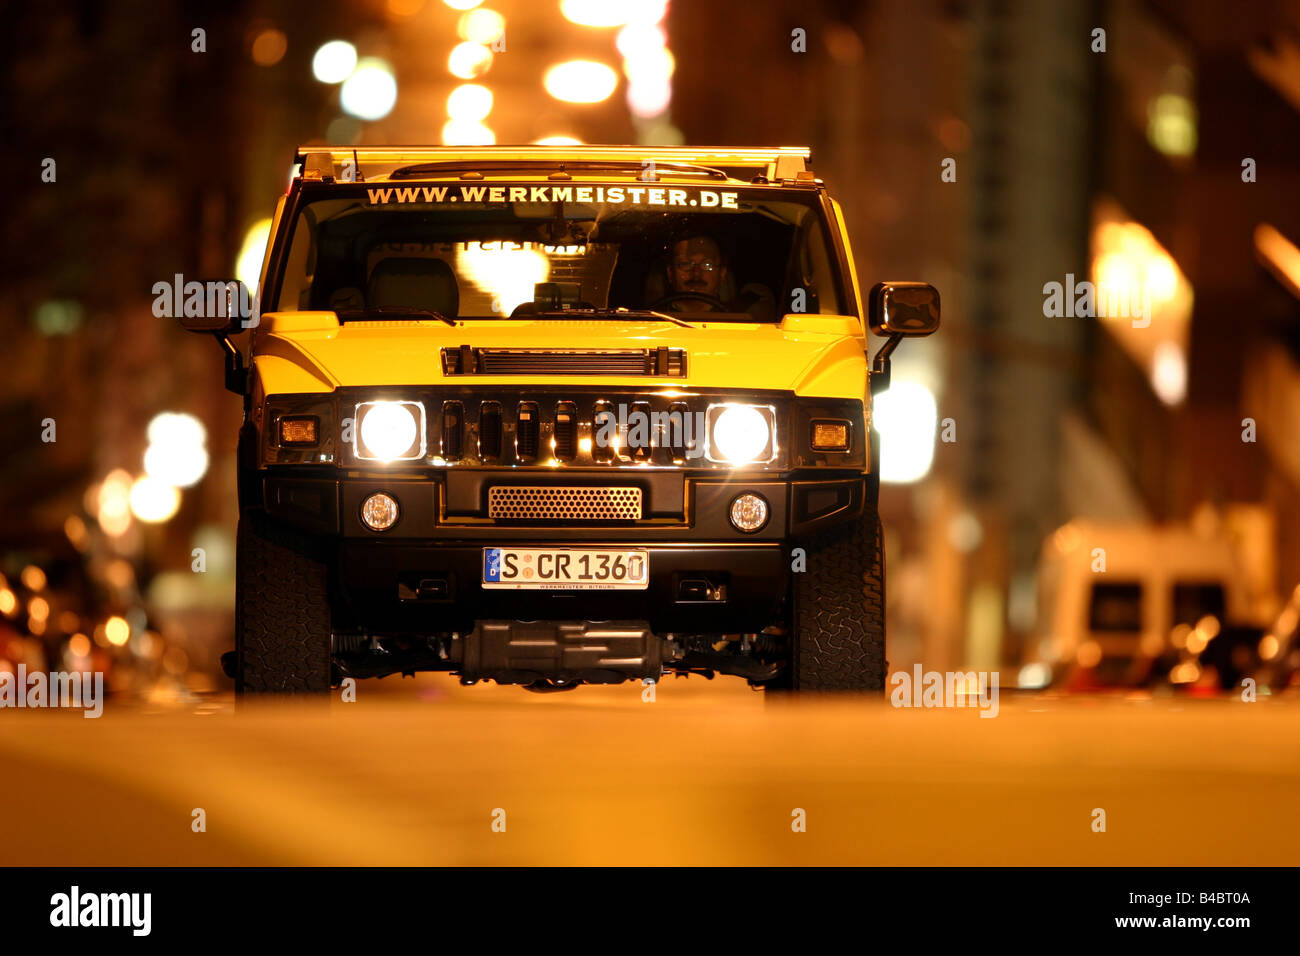 Car, Chevrolet Hummer H2, cross country vehicle, model year 2001-, yellow, driving, frontal view, City, at night, photographer: Stock Photo